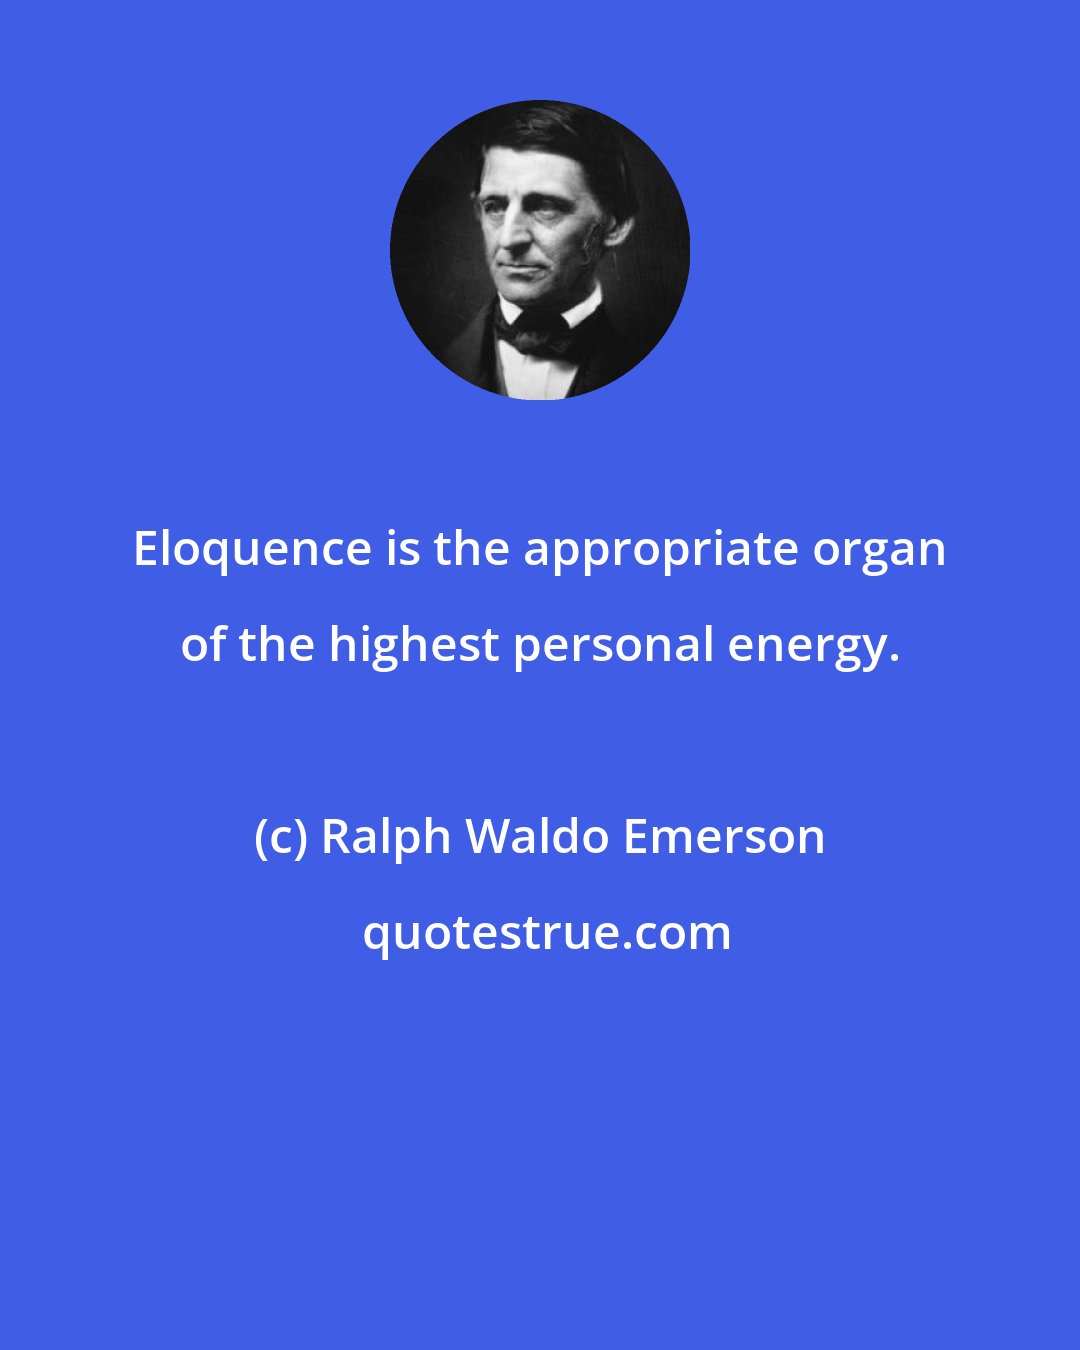 Ralph Waldo Emerson: Eloquence is the appropriate organ of the highest personal energy.